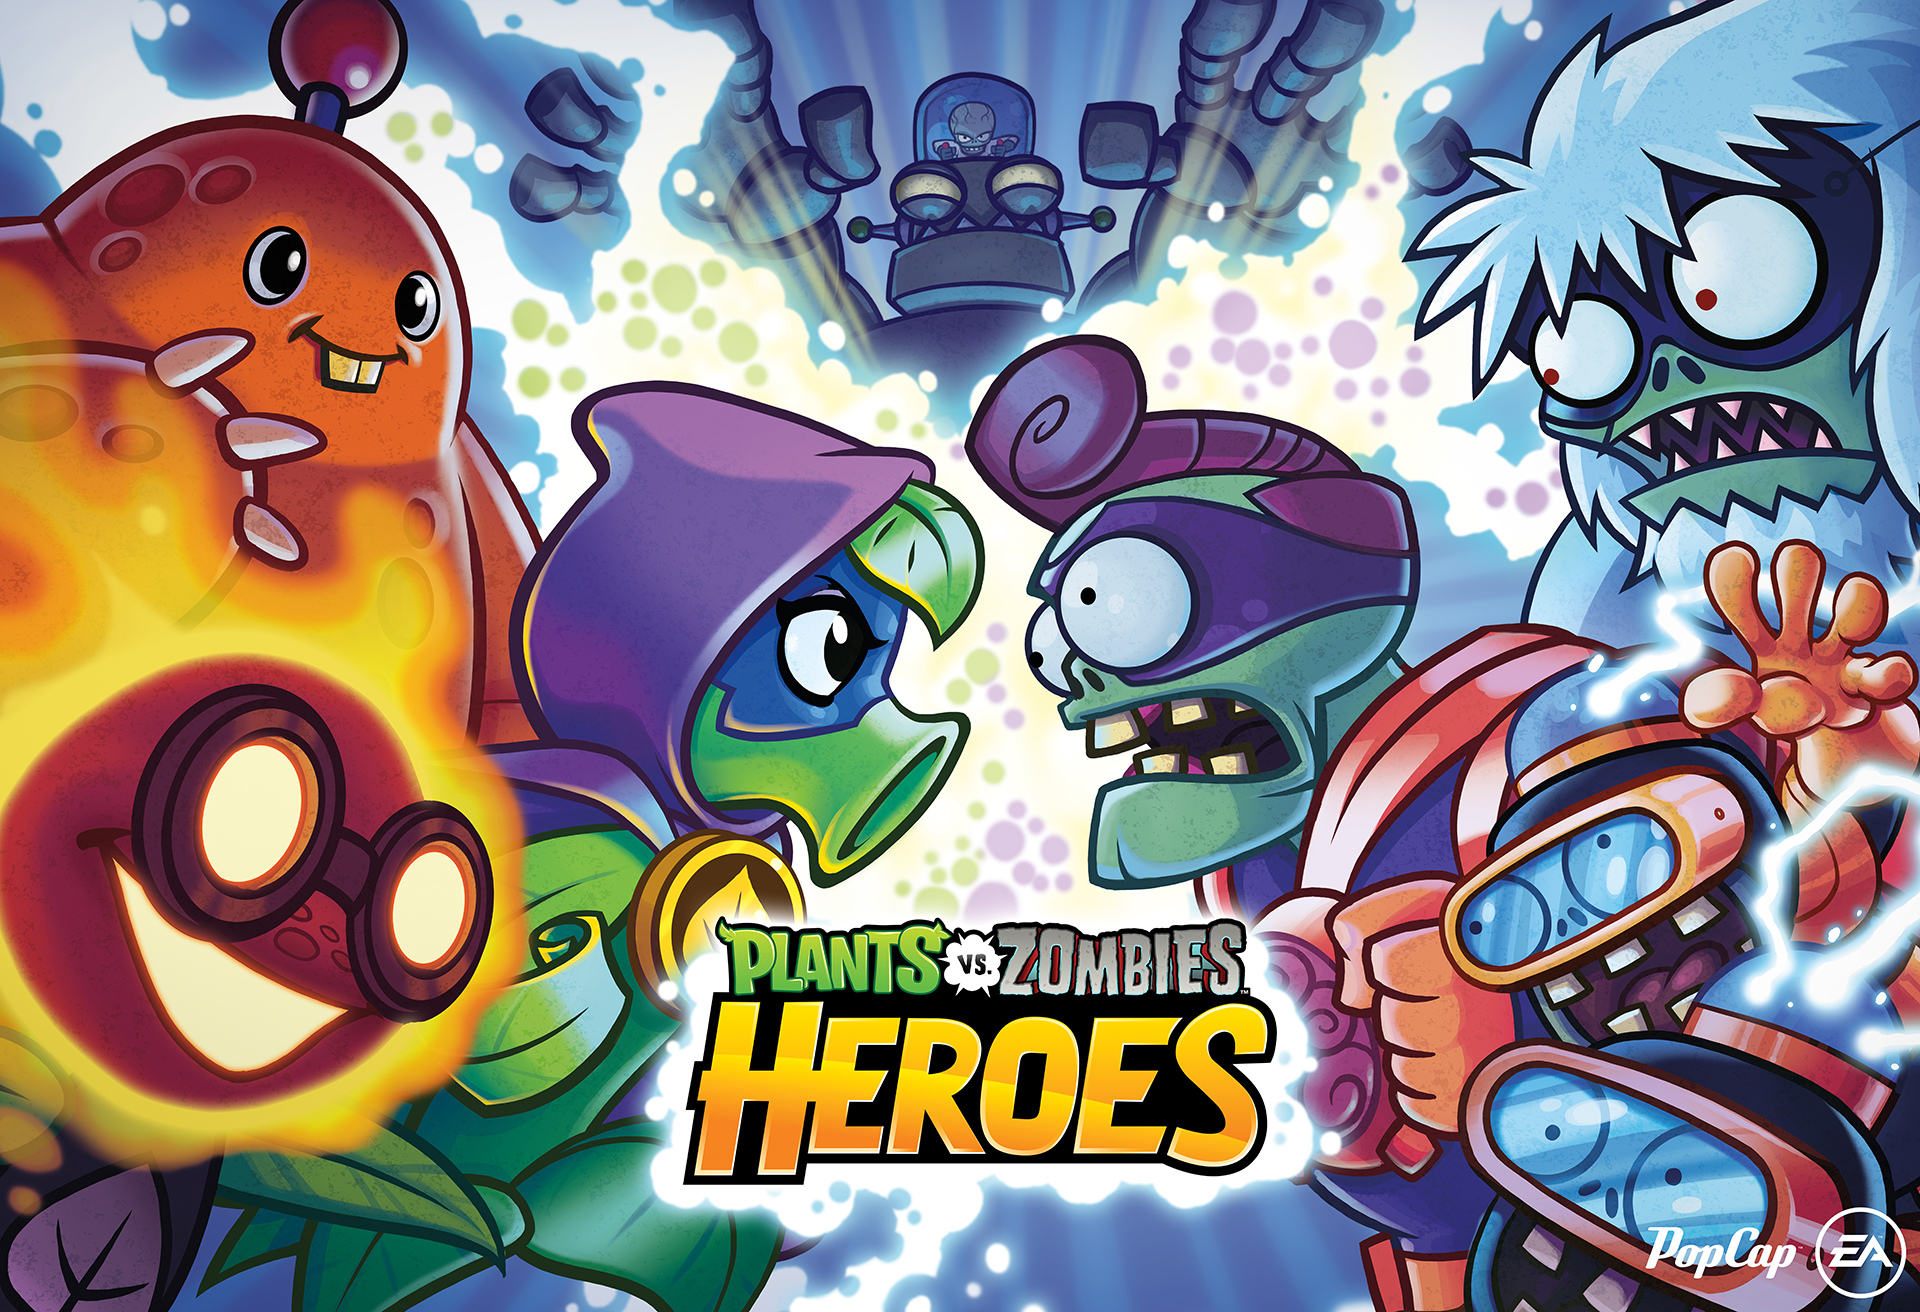 Plants vs. Zombies: Heroes is the Hearthstone mashup I didn't know